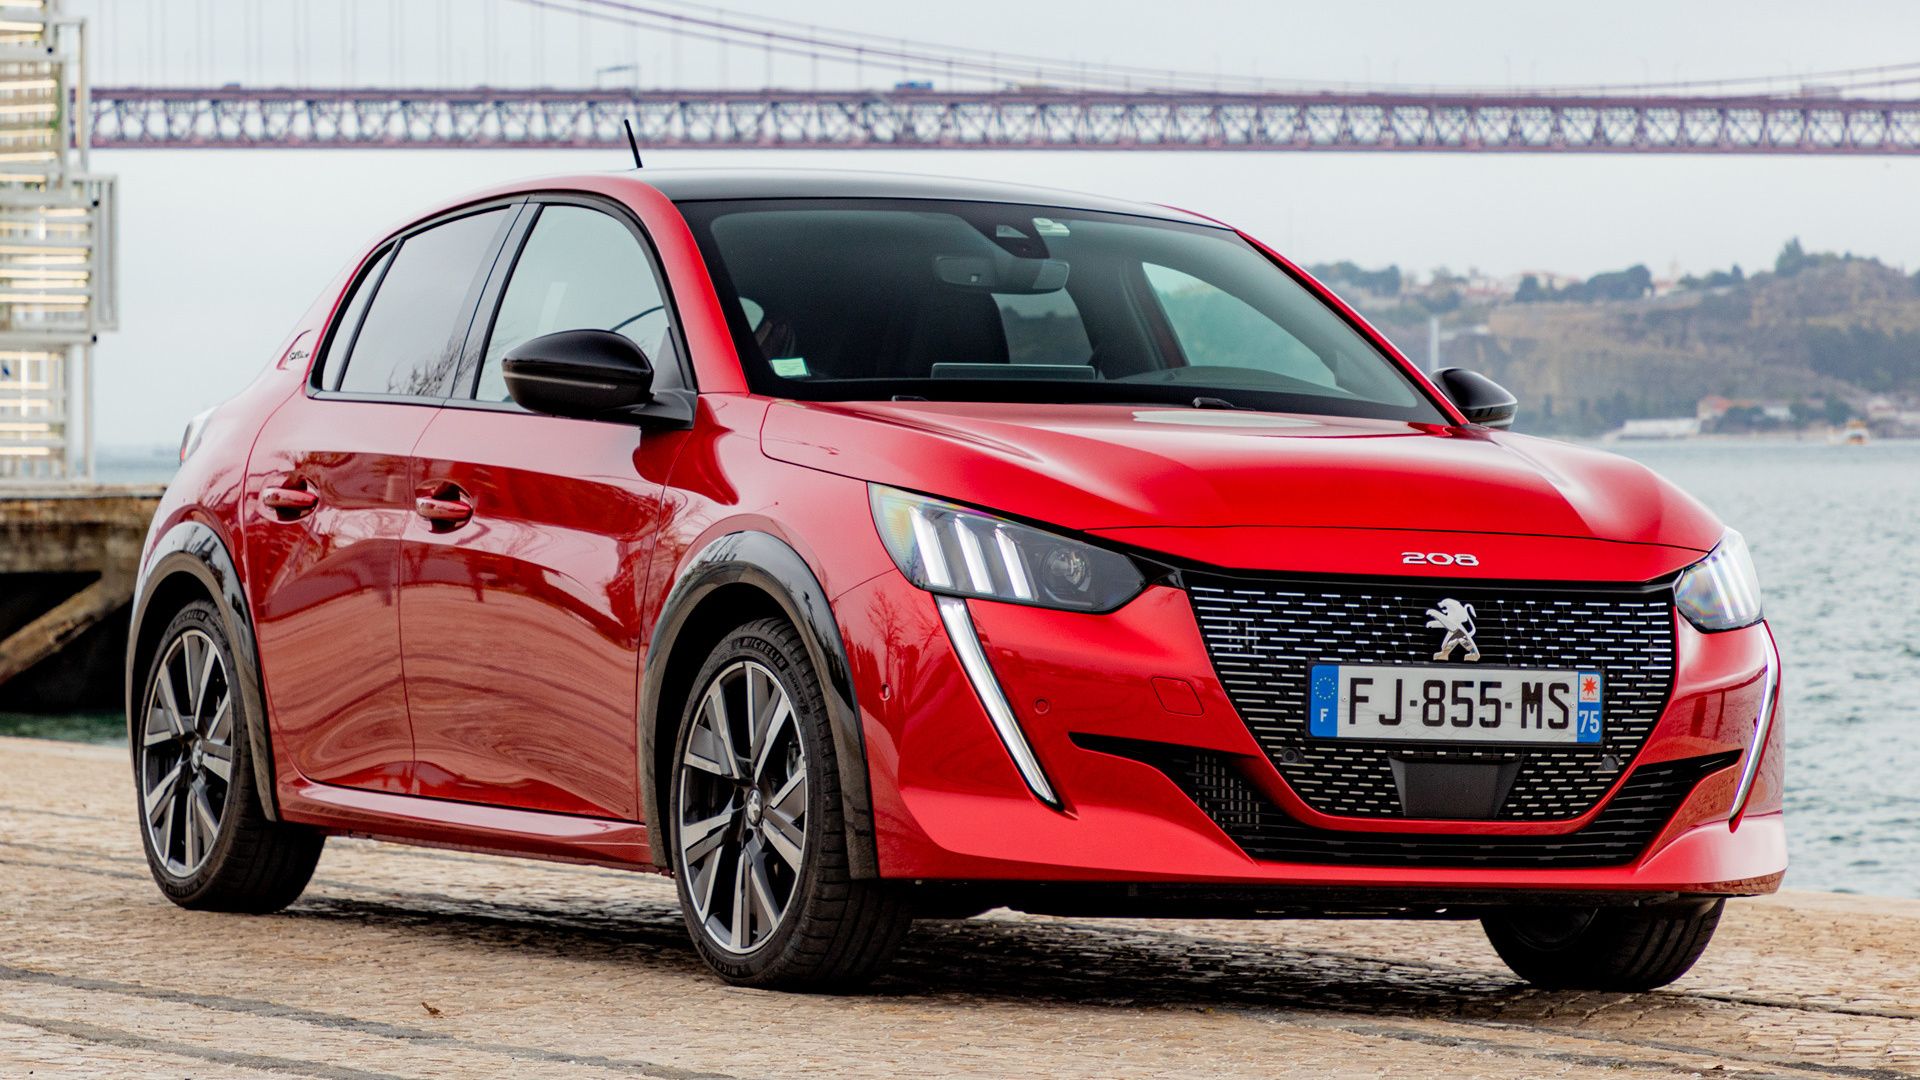 Peugeot 208 review from CarShop